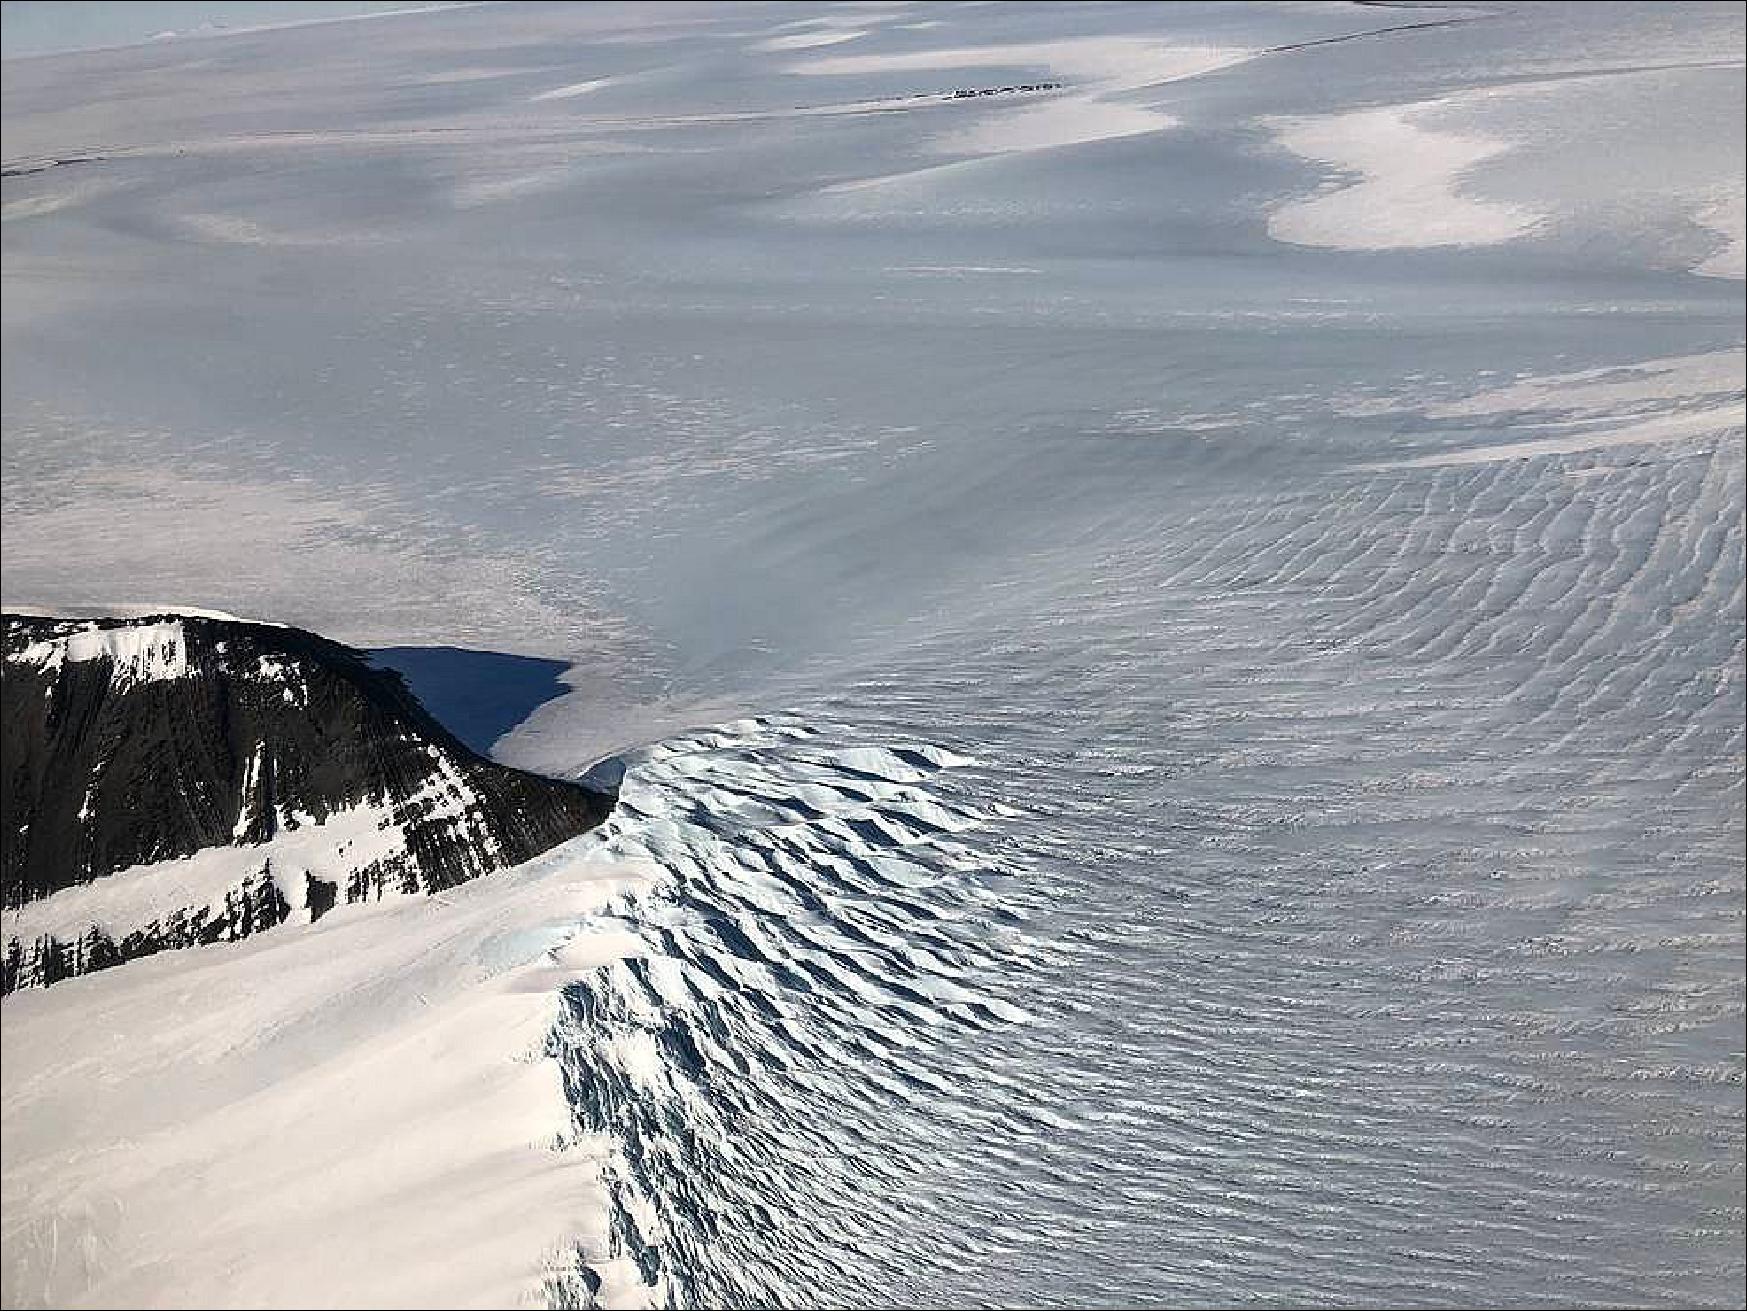 Figure 10: ICESat-2 measurements provide an incredible level of precision as it measures Earth's surface, including the Antarctic ice sheet seen here (image credit: NASA's Goddard Space Flight Center, Kate Ramsayer)